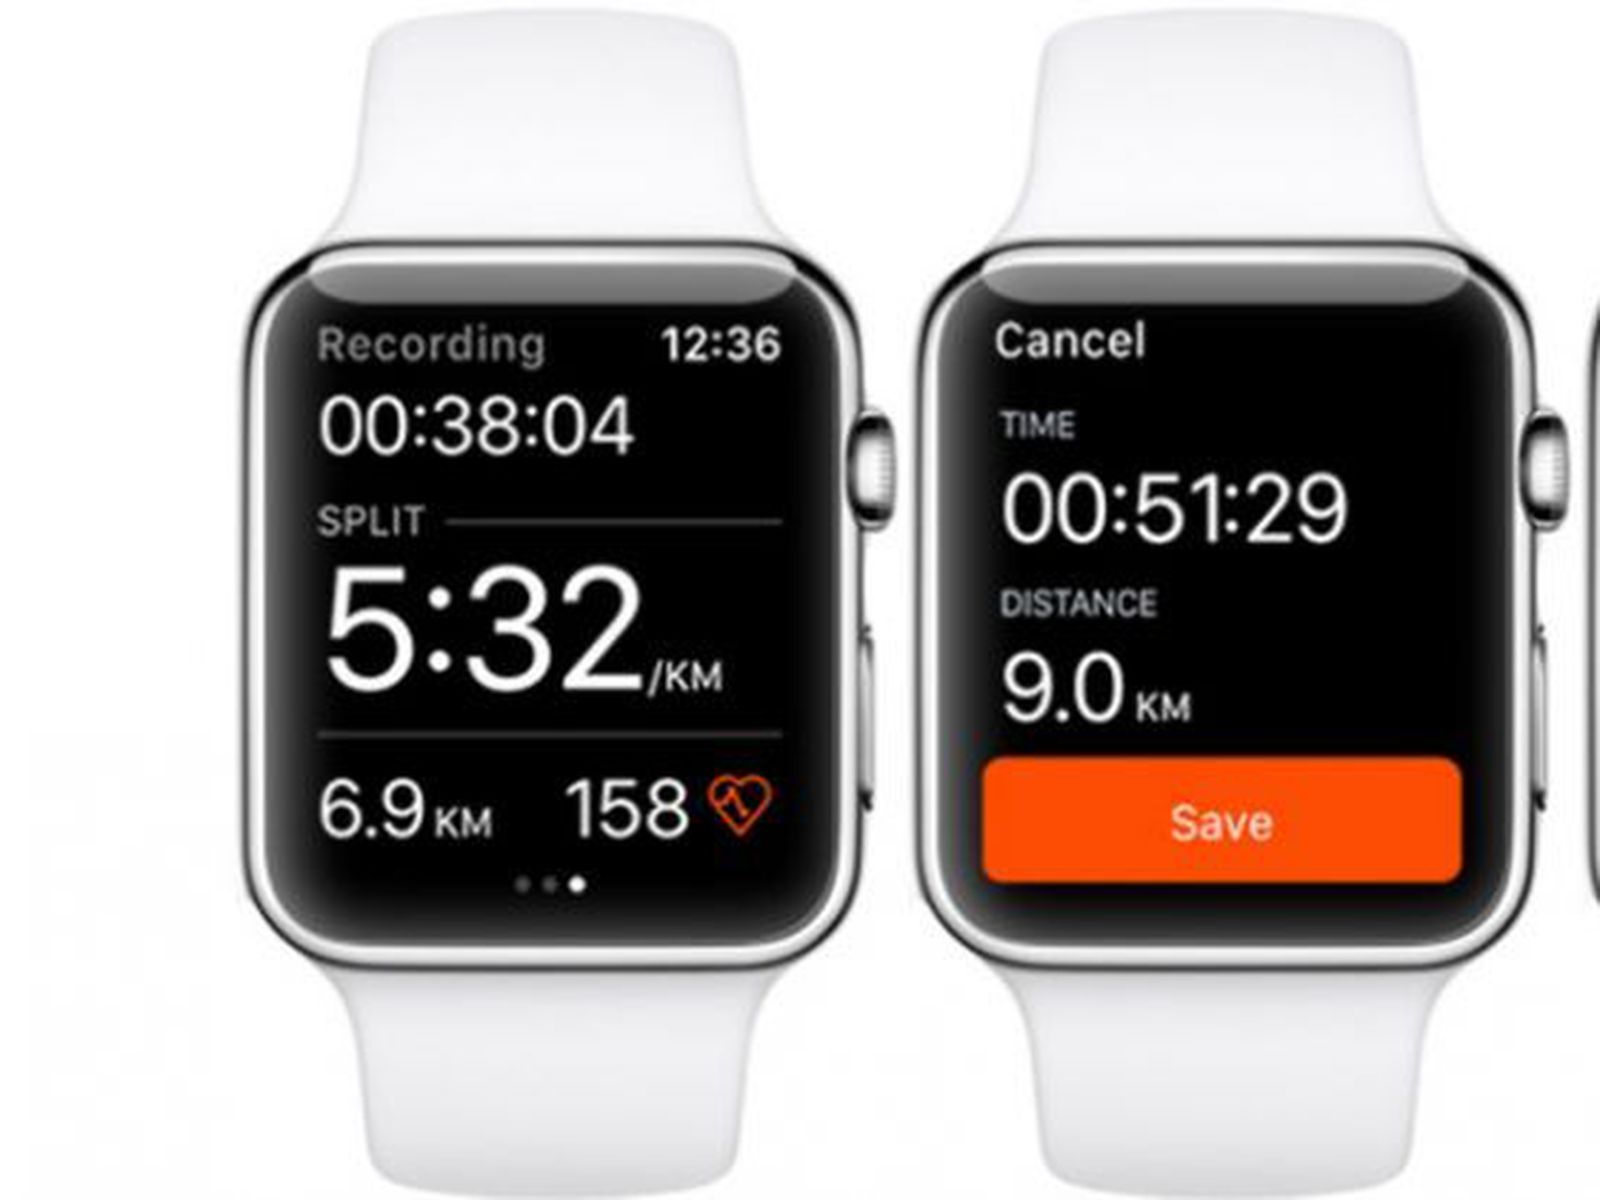 Apple Watch App With GPS For Series 2 Owners - MacRumors